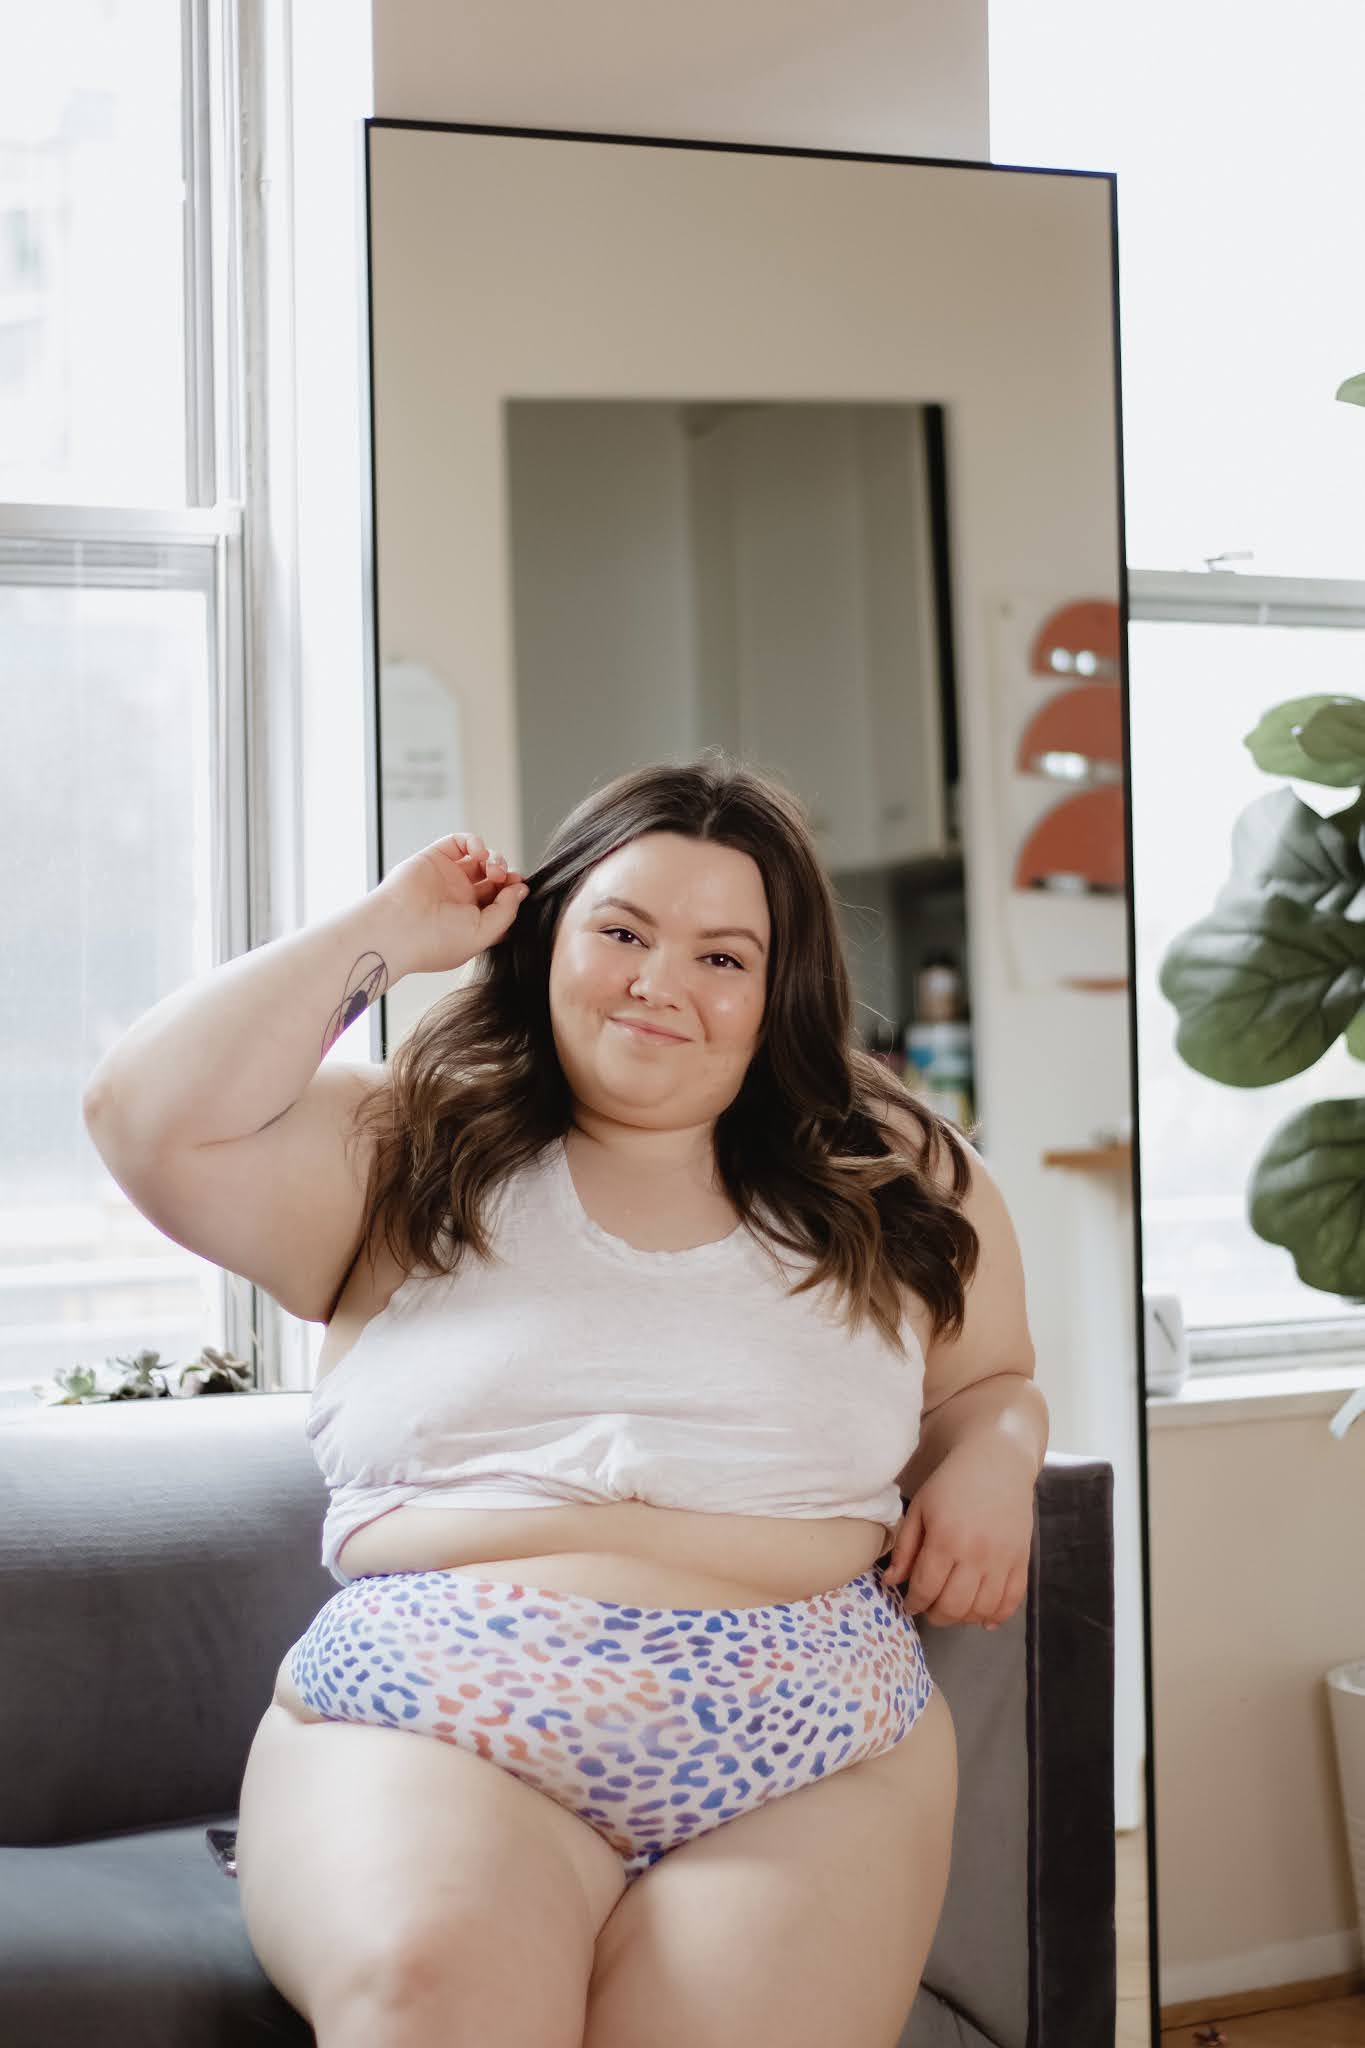 Plus-size women post photos of themselves in Curvy Girl Lingerie